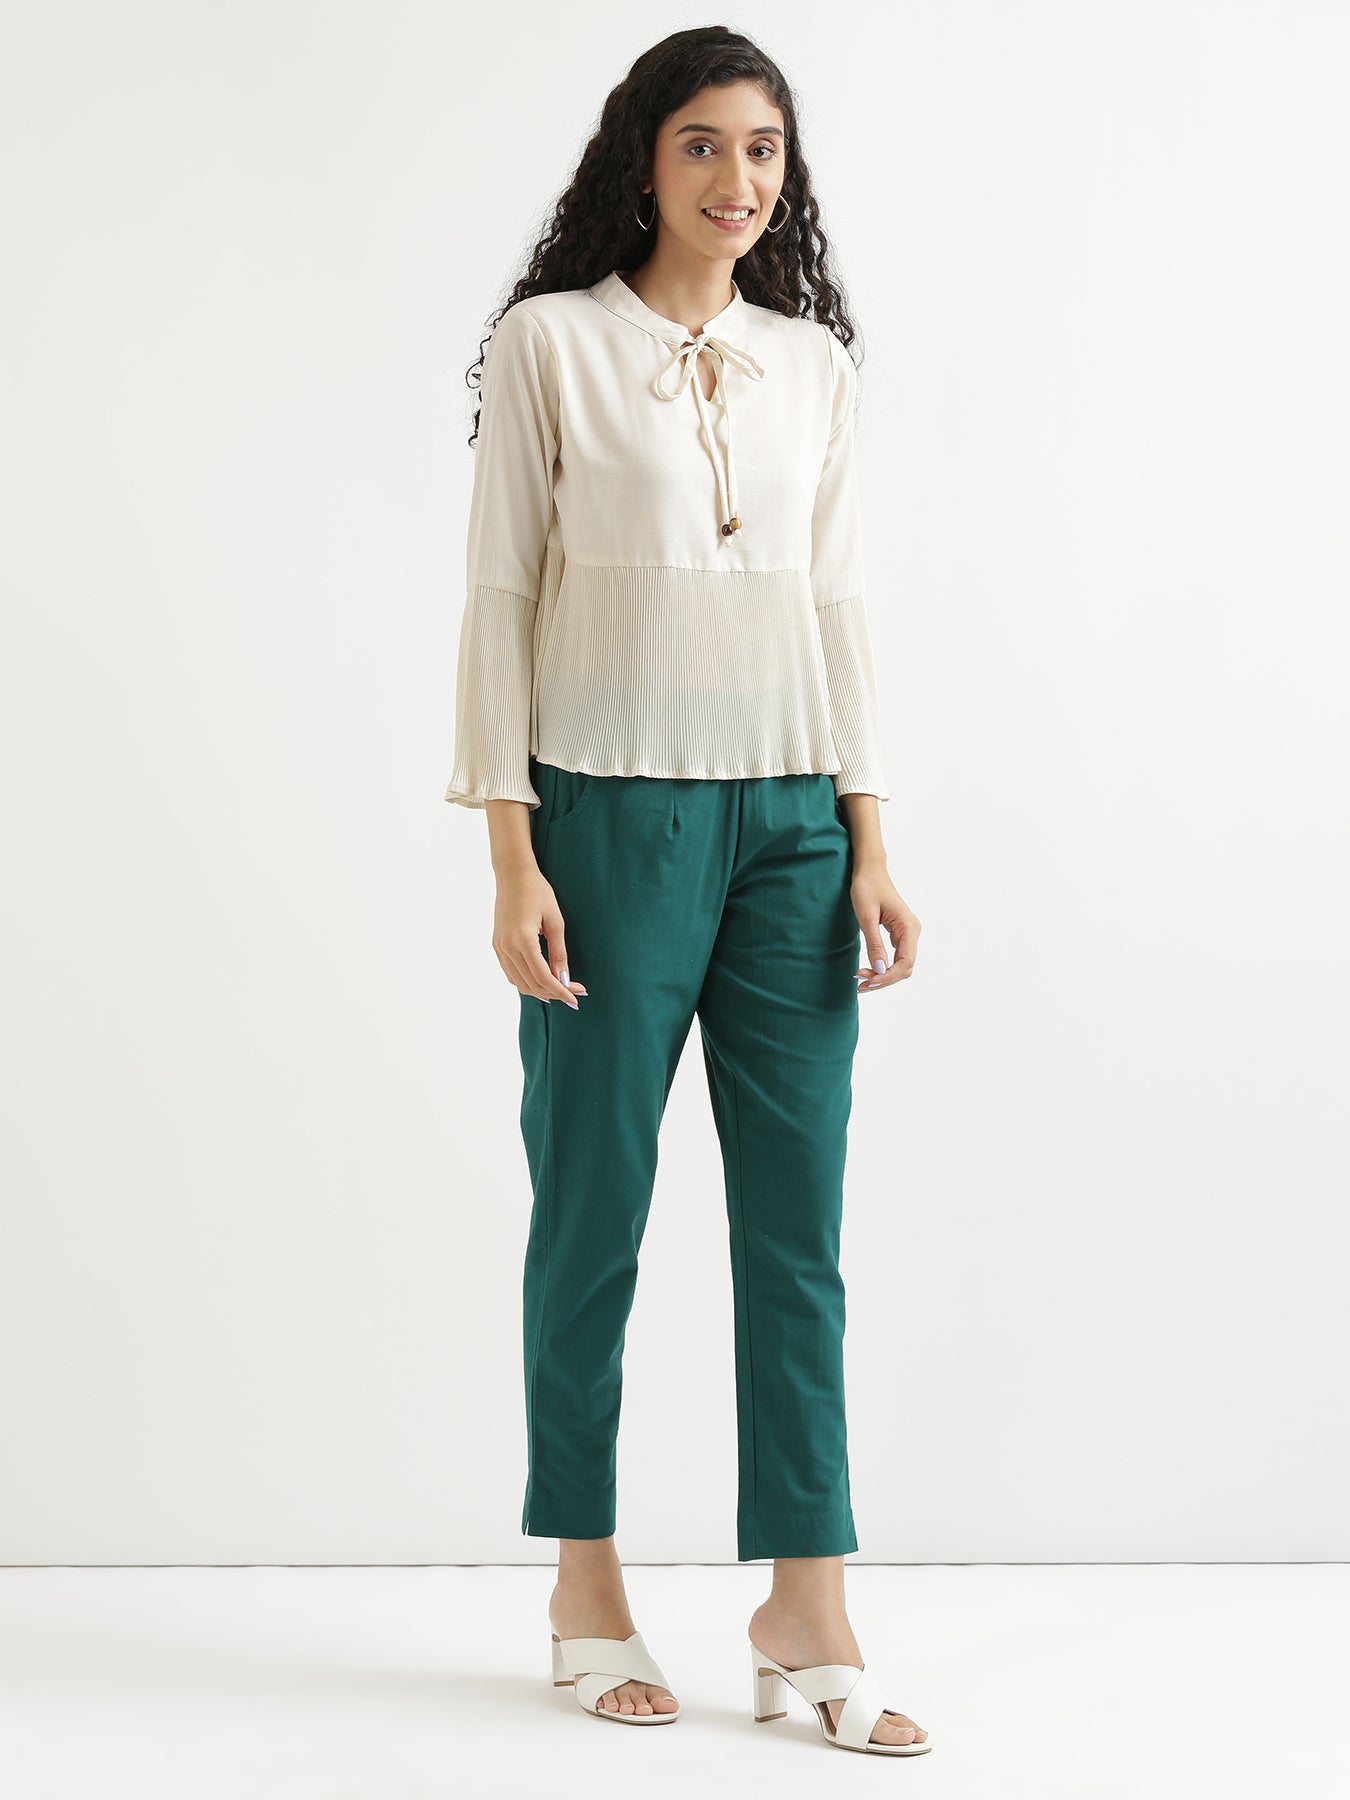 Stylish Addition - Women's Cotton Linen Trousers Ladies Elasticated